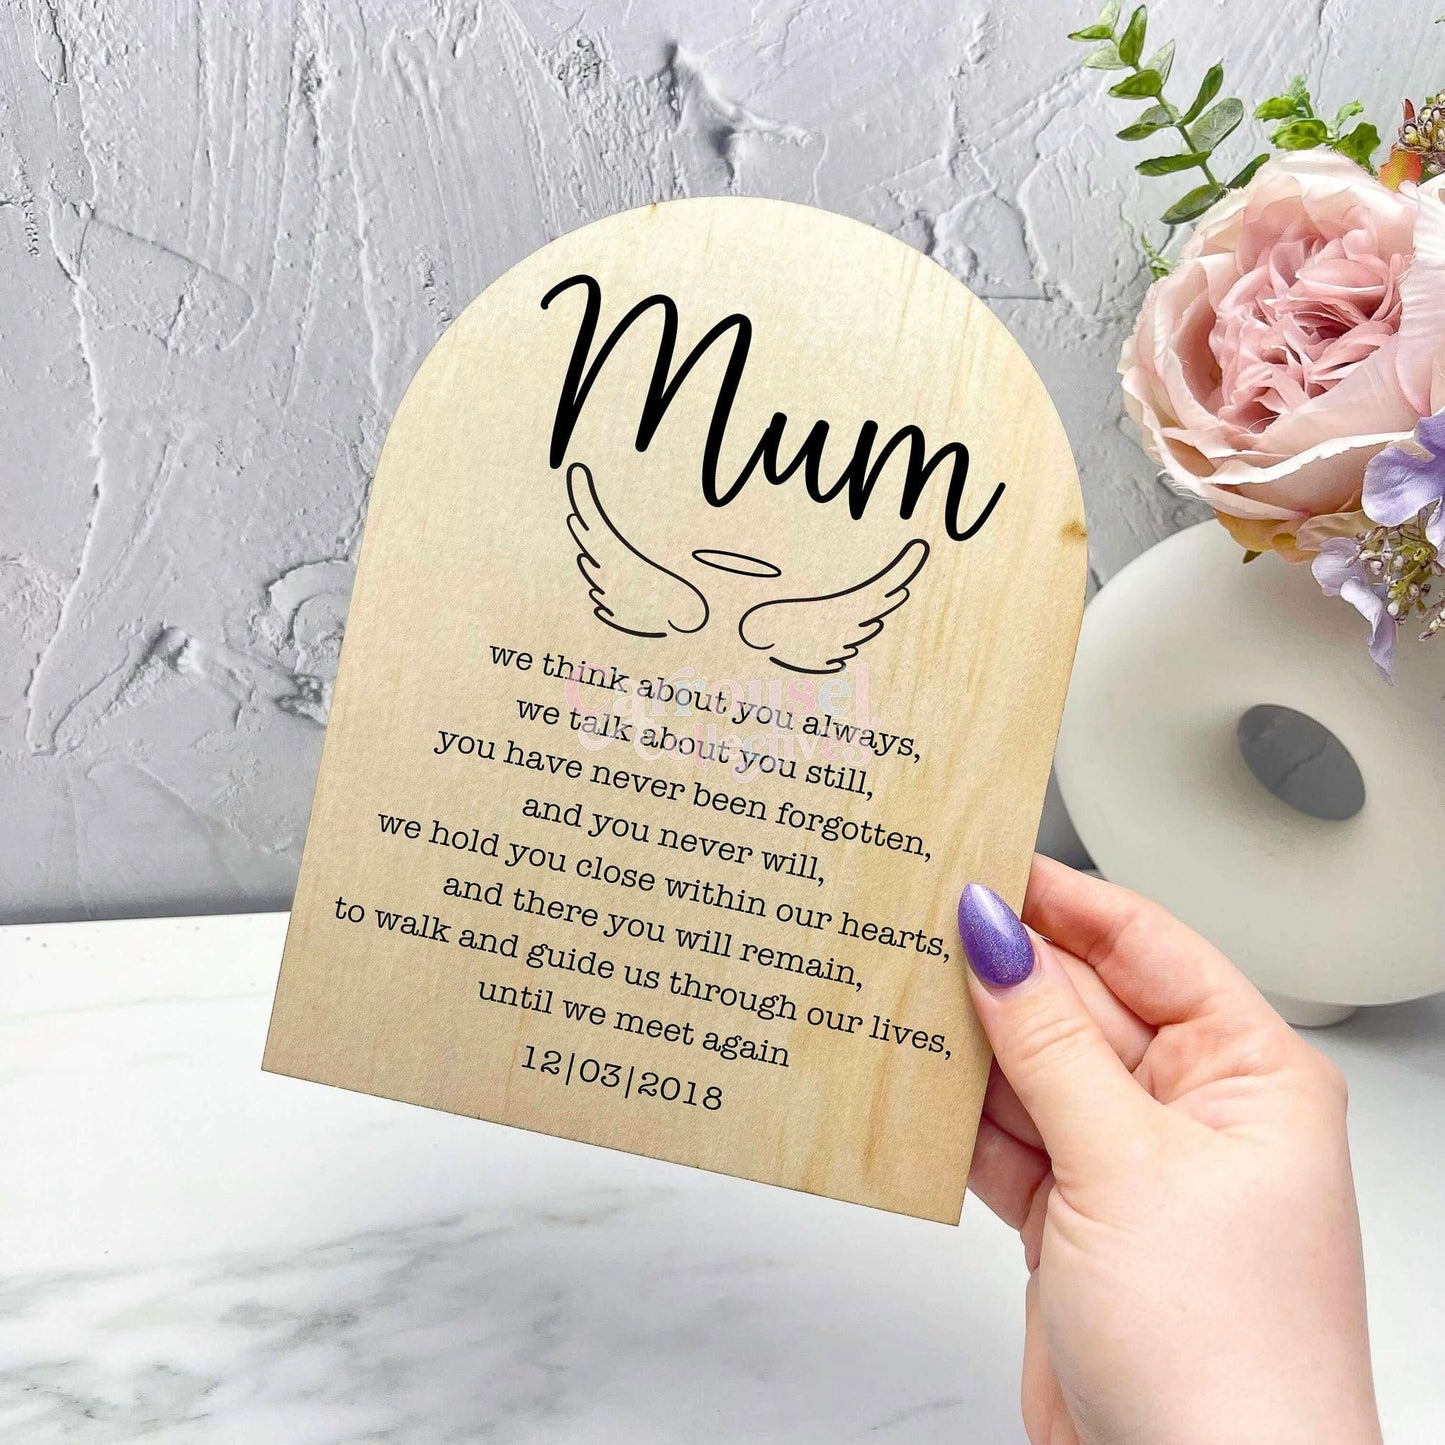 Mum memorial grief sign, memorial quote sign, heaven quote sign, grief sign s31